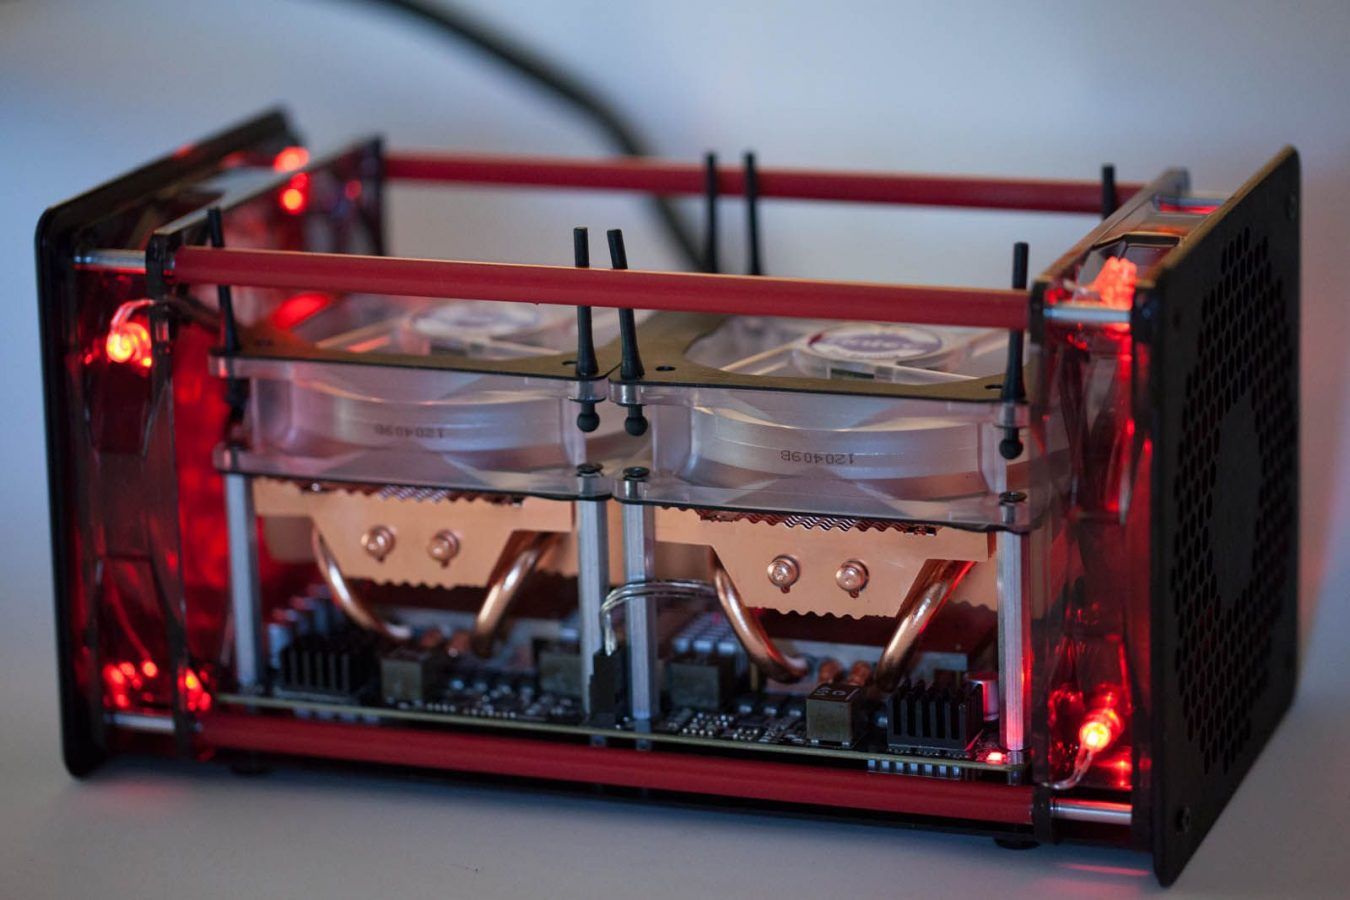 Wikimedia Commons photo of bitcoin miner from company Butterfly Labs